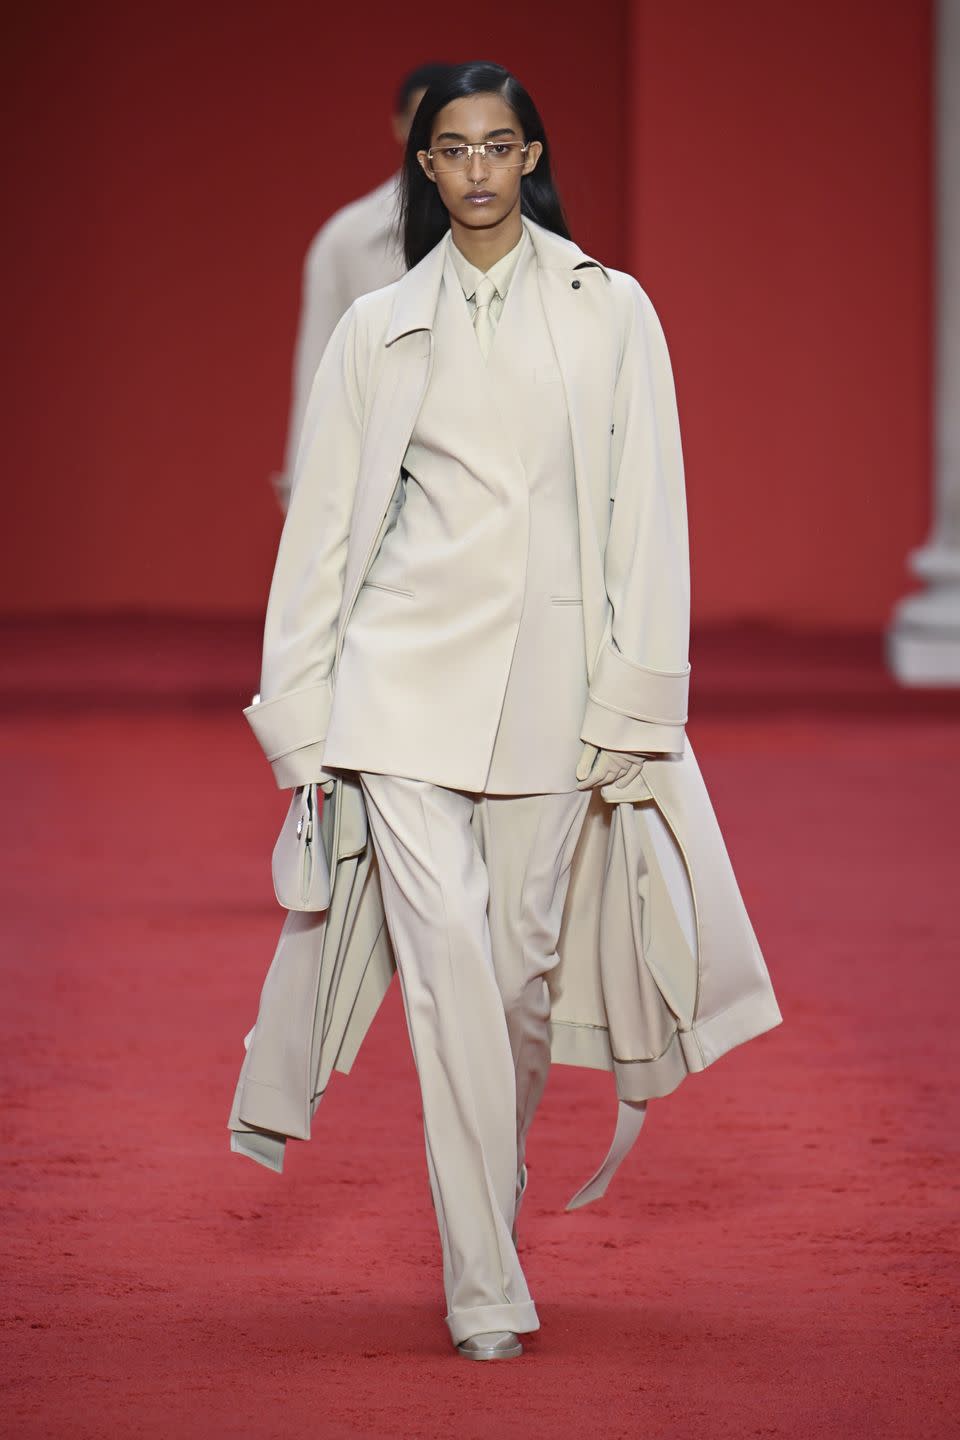 <p>On a rainy Sunday morning in Milan, Ferragamo (sans Salvatore) got a breath of fresh air via its new creative director, Maximilian Davis. Davis got his start with his eponymous brand, raised under the astute tutelage of Lulu Kennedy of the Fashion East group in London. His eye for clean silhouettes, minimal proportions, and ease of wear translated into the rich and luxe history of the Italian brand. The main takeaway was his light hand reworking the iconic leather goods the brand is known for. Now that he’s gotten his debut out of the way, we can’t wait to see what he cooks up next.<em>—Kevin LeBlanc, fashion associate</em></p>